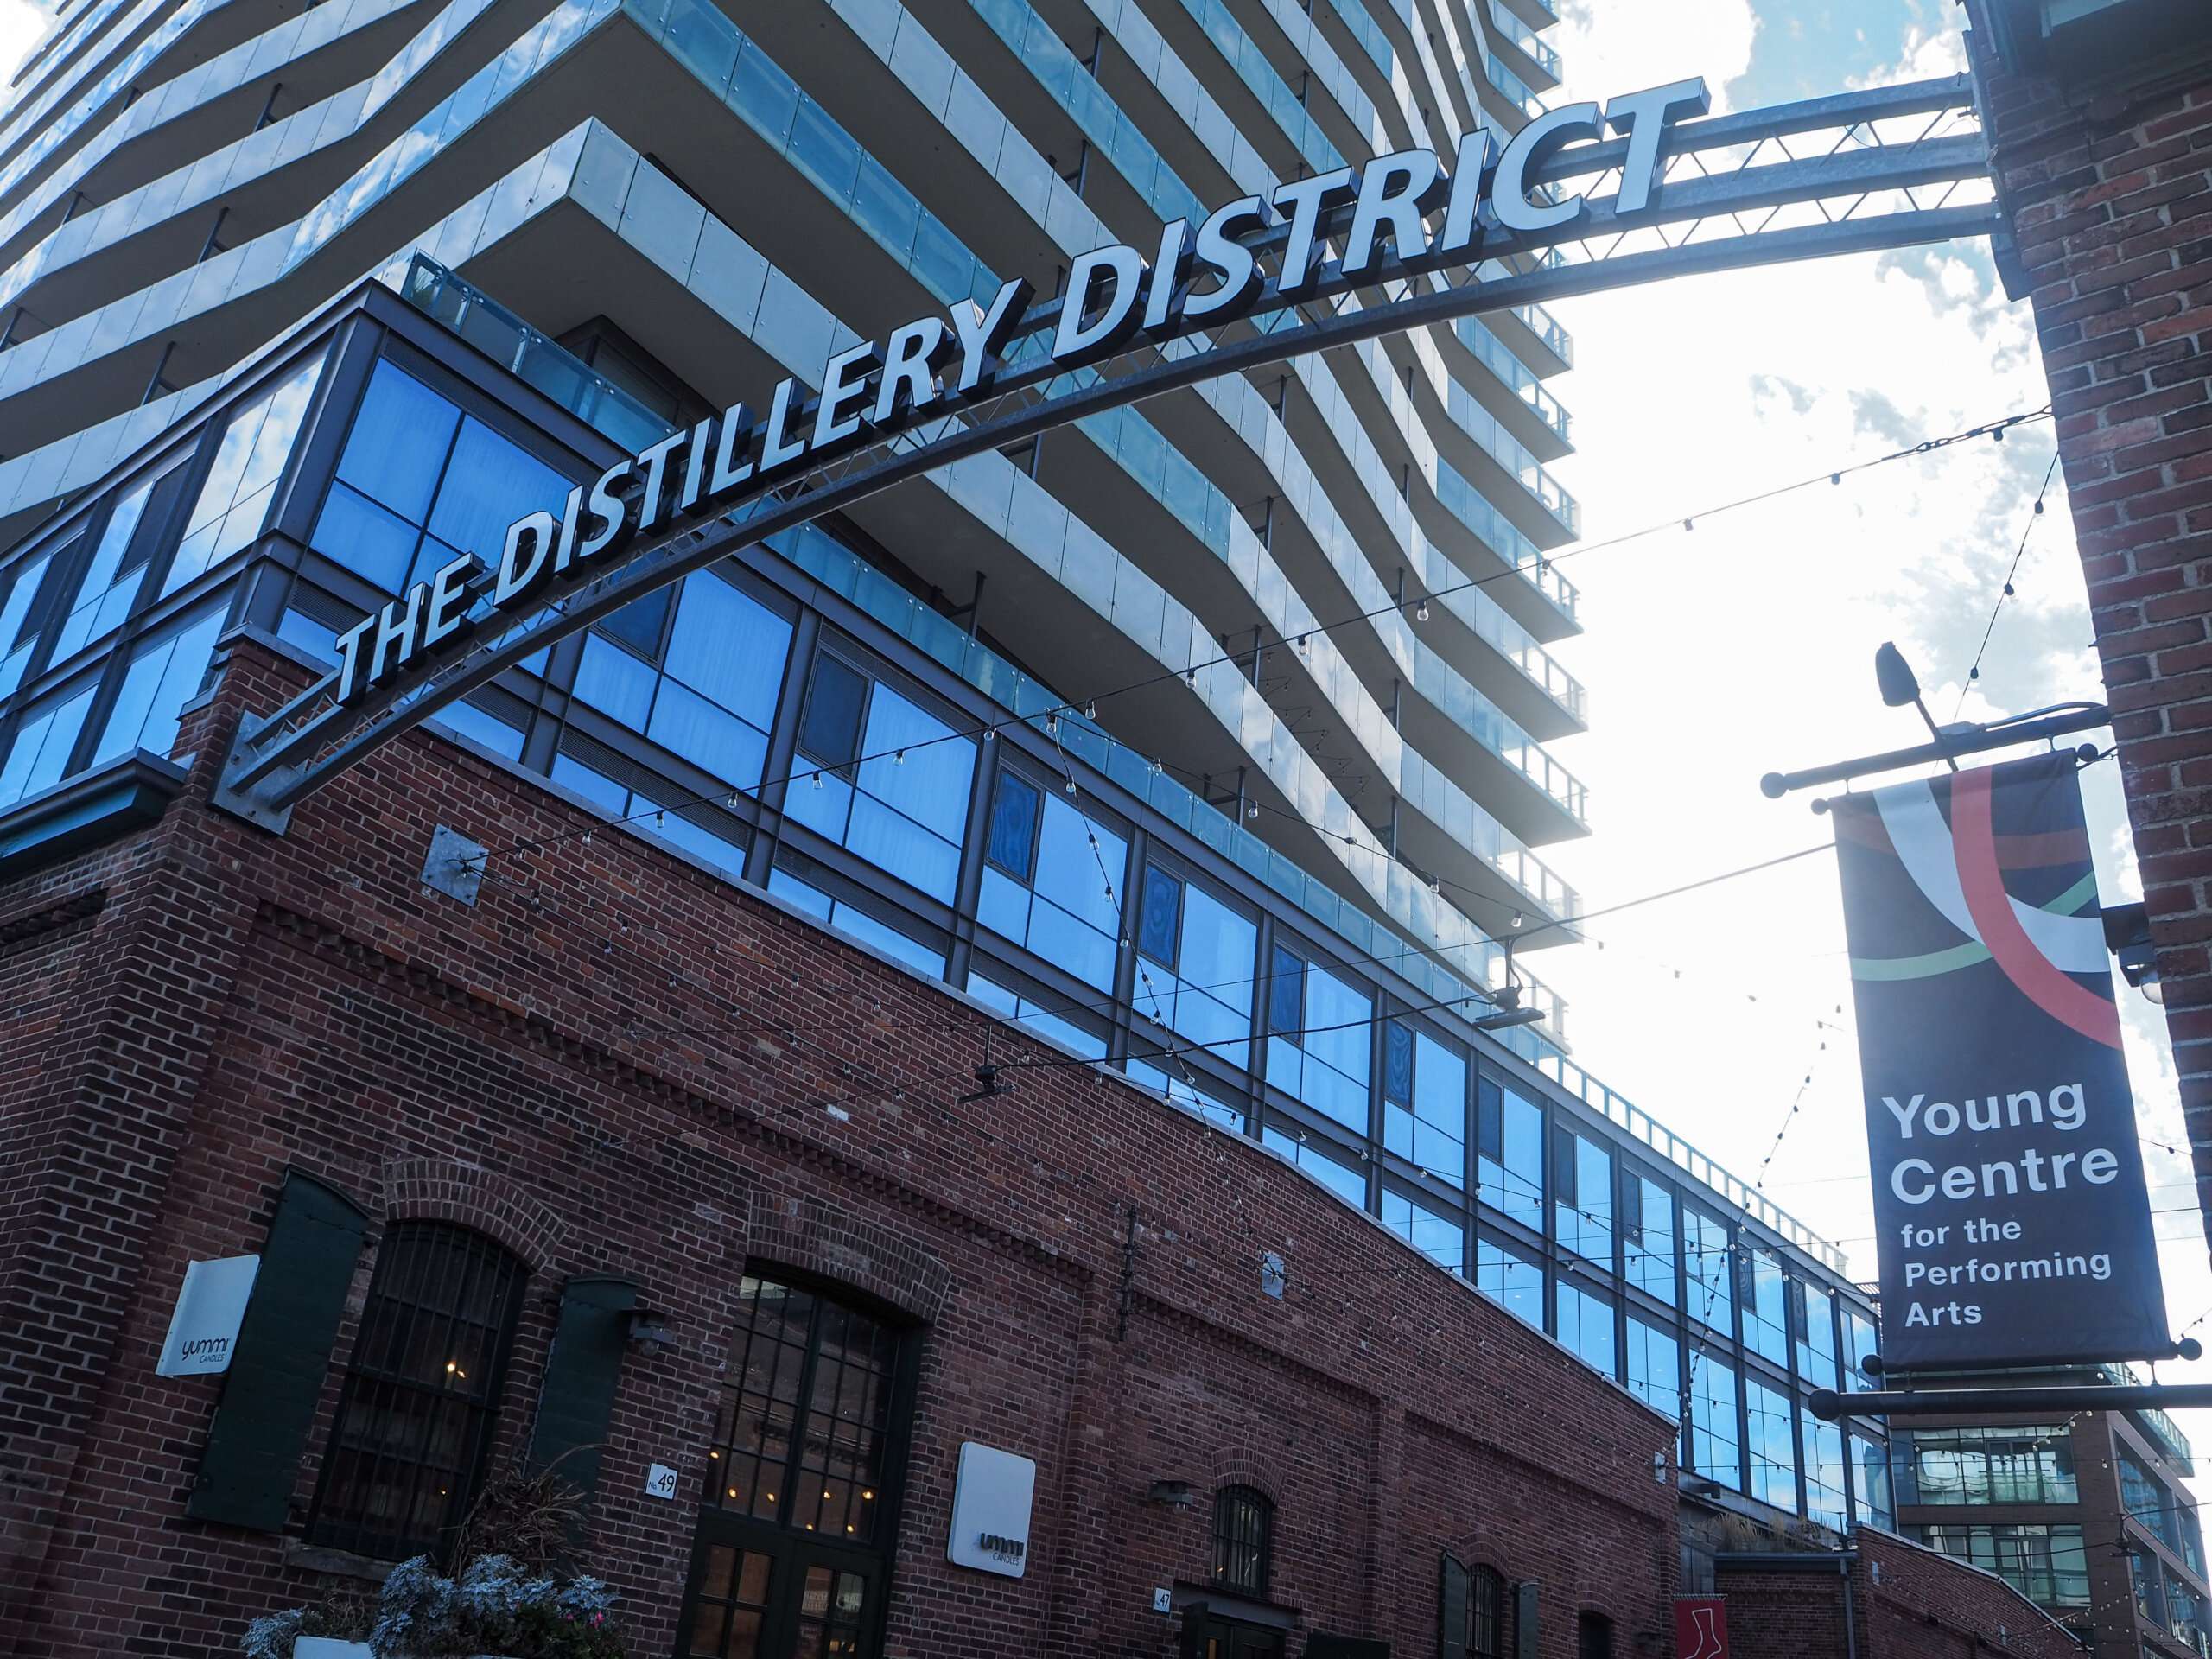 a black and white sign with distillery district written on it in between two buildings